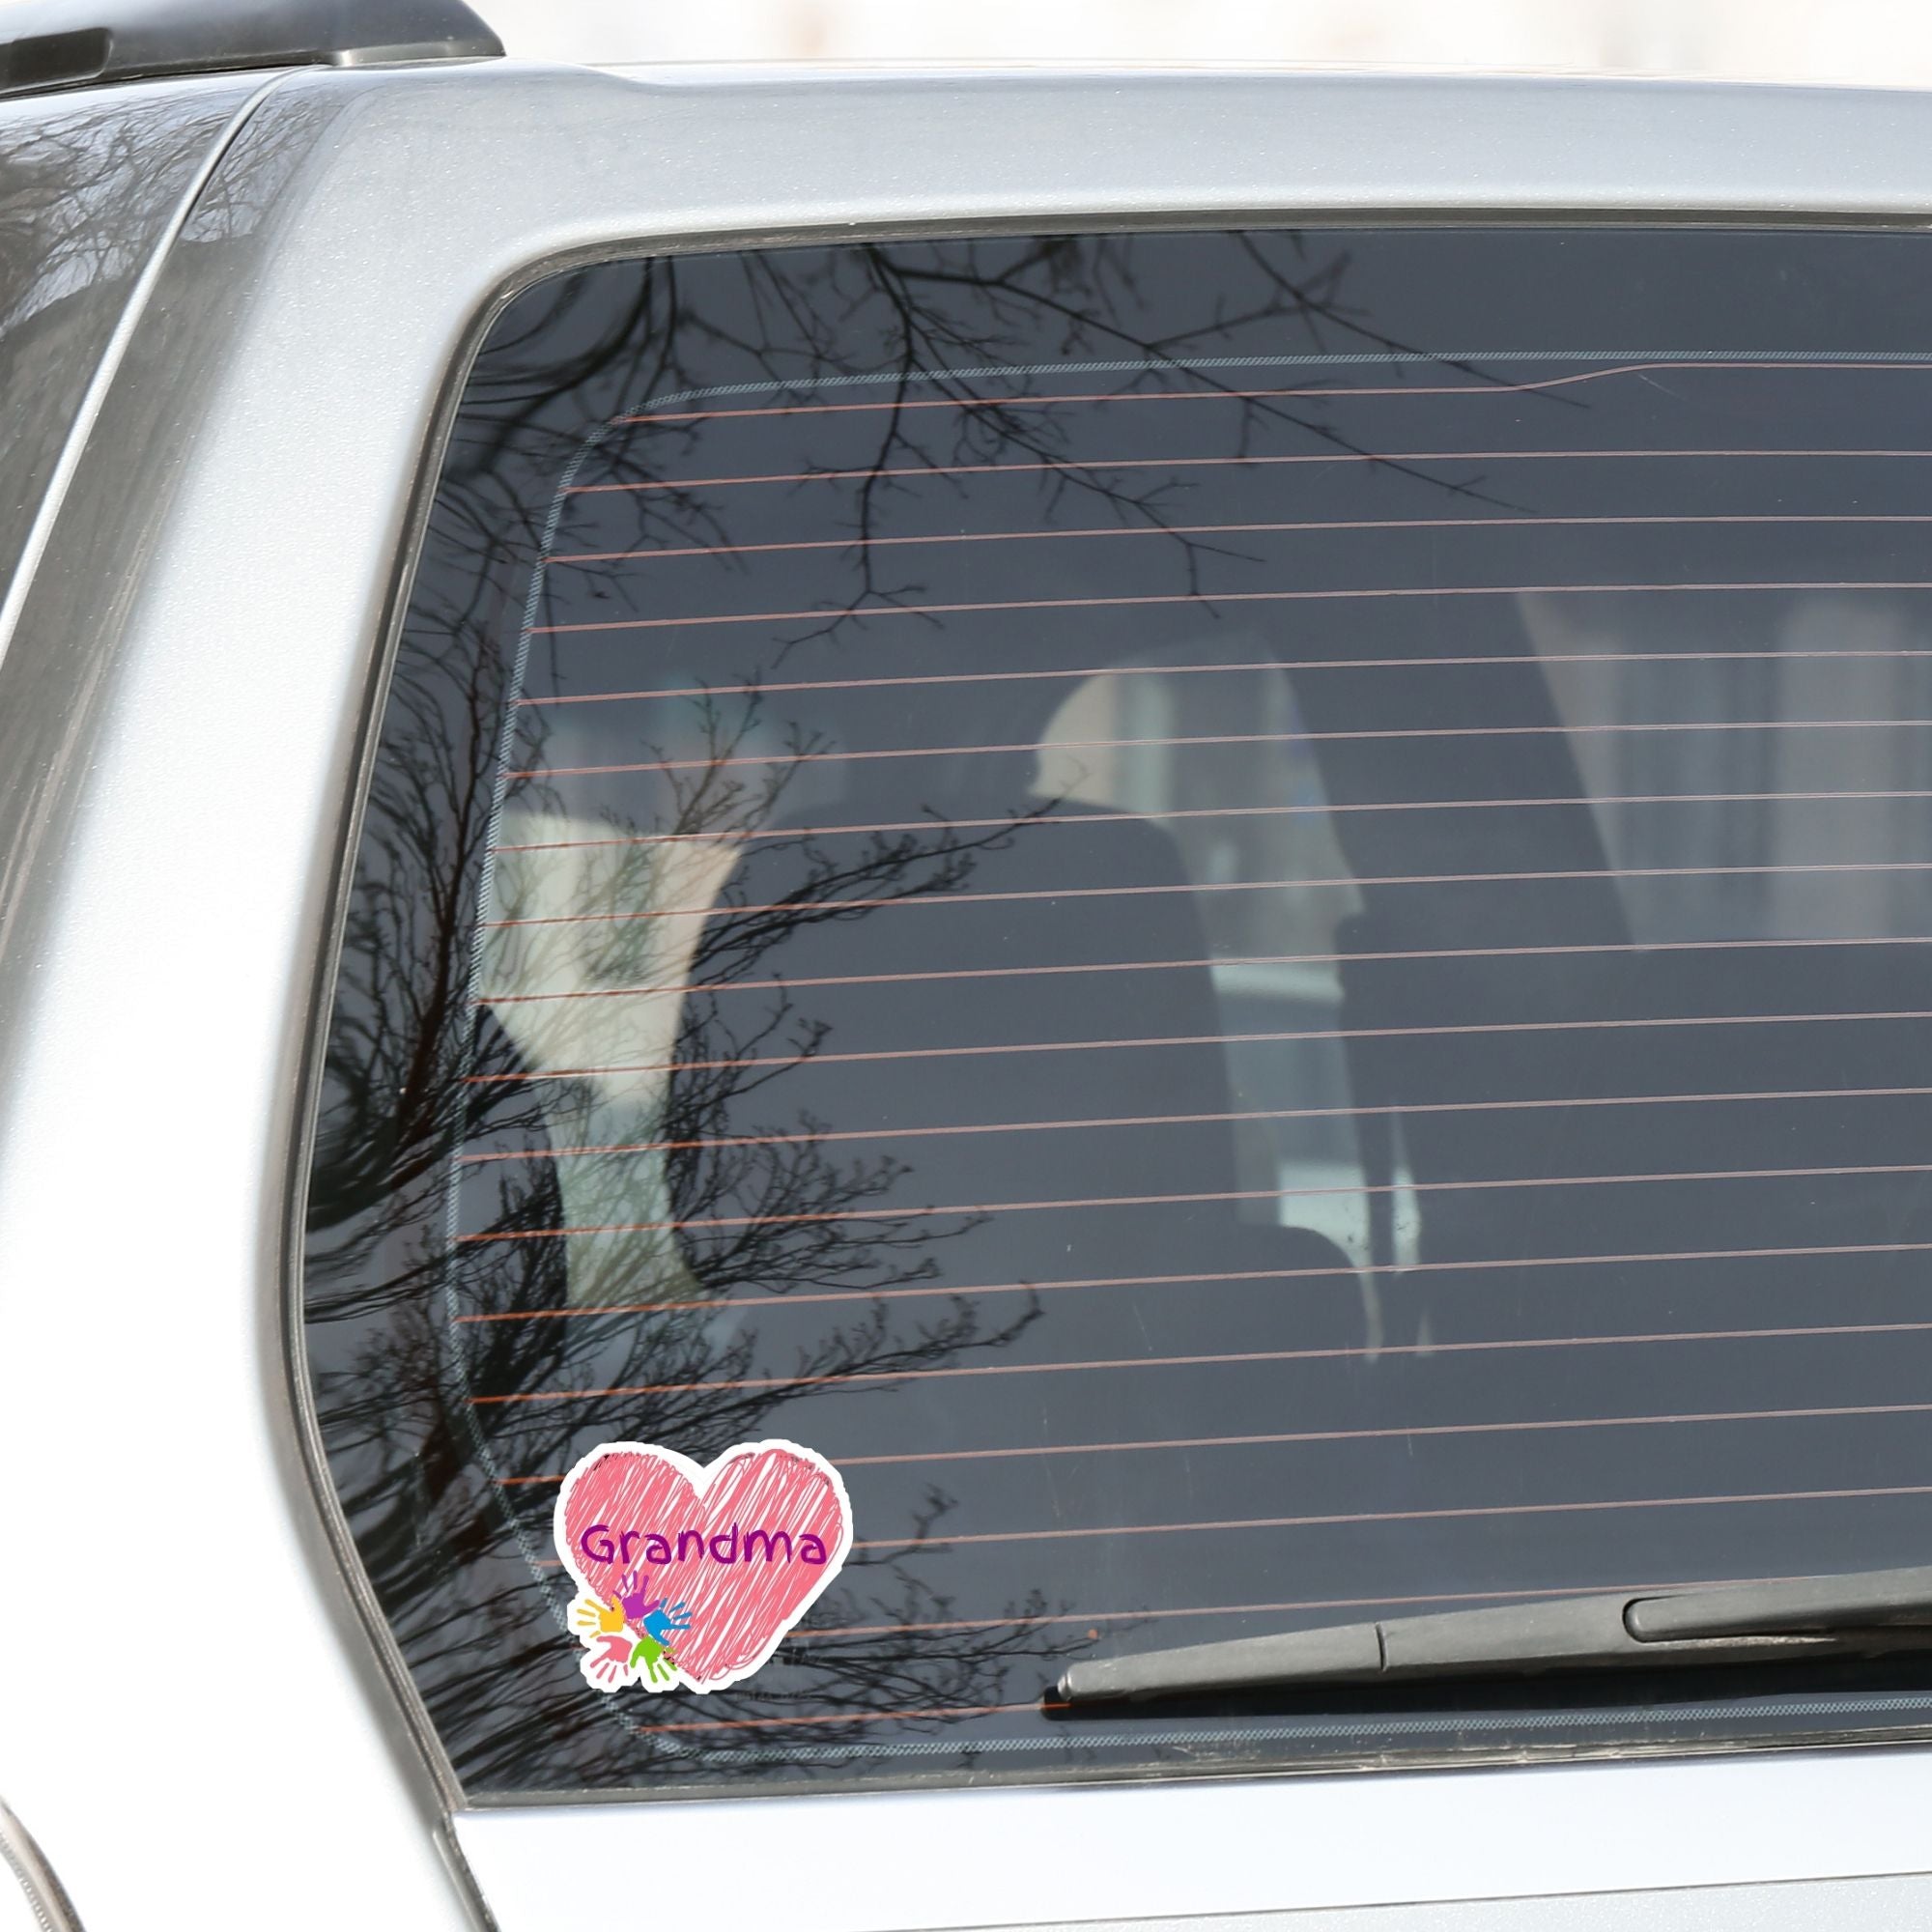 Show how much you love grandma with this individual die-cut sticker. This makes a great gift for grandma, or for all grandma's to proudly show they are a grandmother! This sticker features a red scribbled heart with Grandma written across the middle and 5 small paint hands on the lower left side. This image shows the Grandma sticker on the back window of a car.